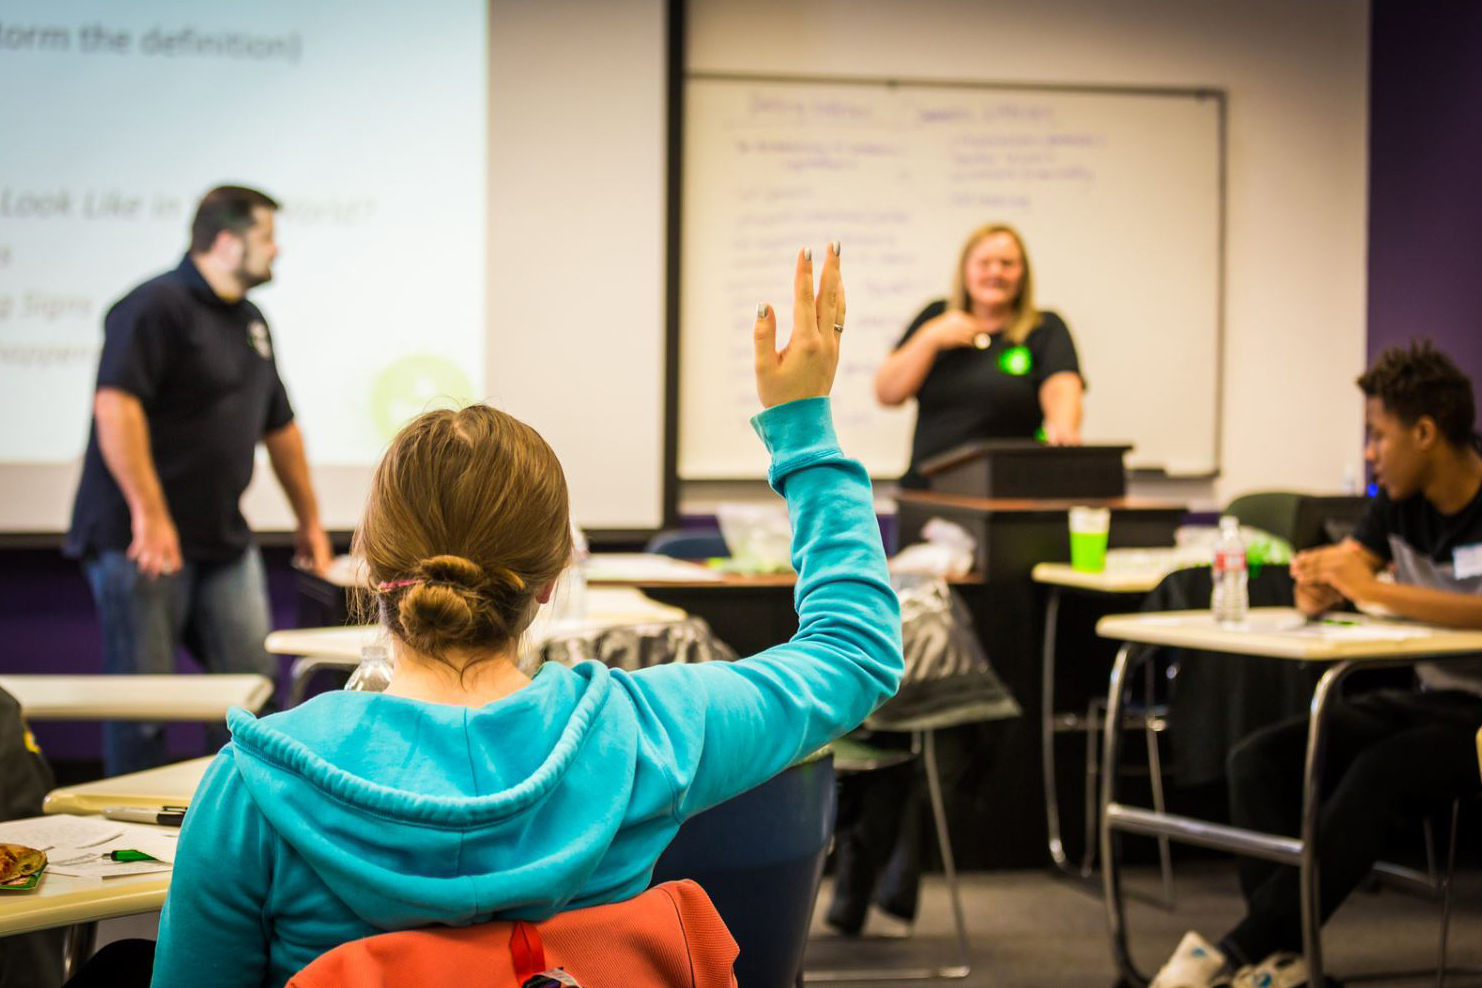 Police Chief Keith Mallard and Assistant Professor of Social Work Kim Swisher lead a session in UAF's Green Dot training program. The effort is part of nationwide program seeking to reduce violence and sexual abuse on college campuses.